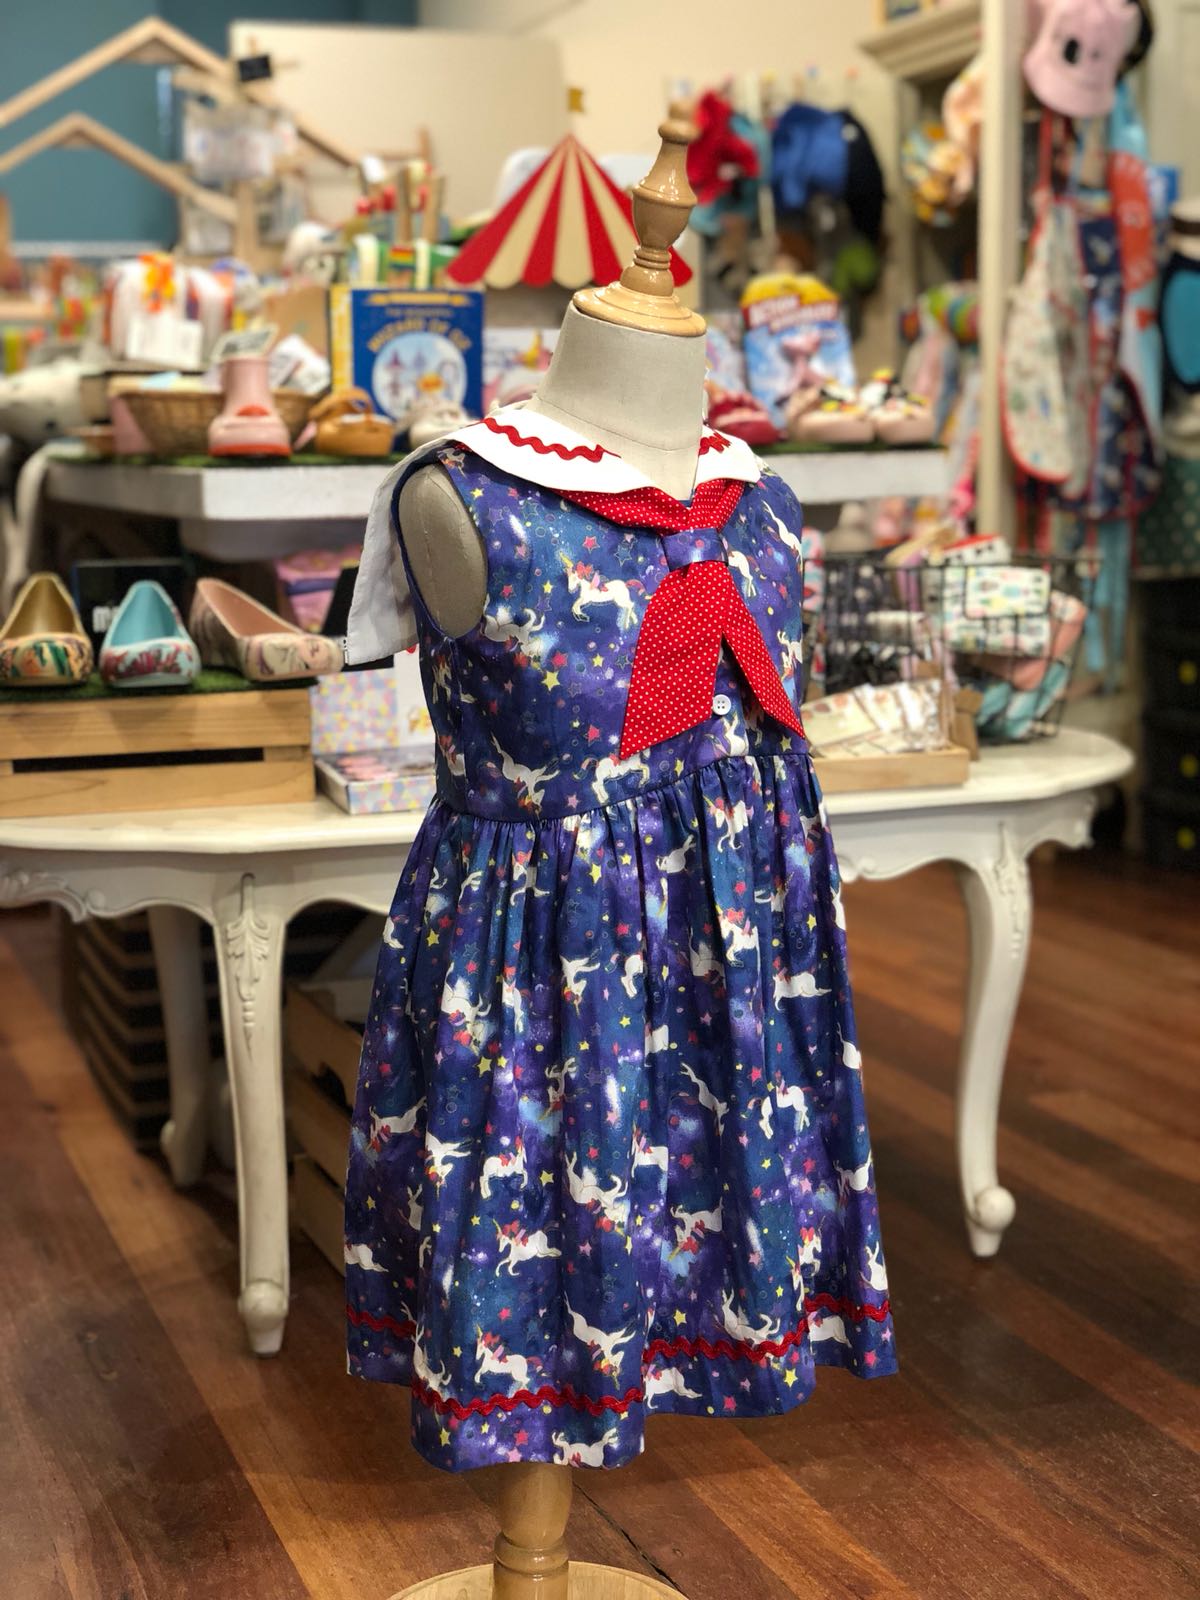 Sailor Girl Dress - Unicorn (Low in Stock /Size: 2 &3 yrs old)